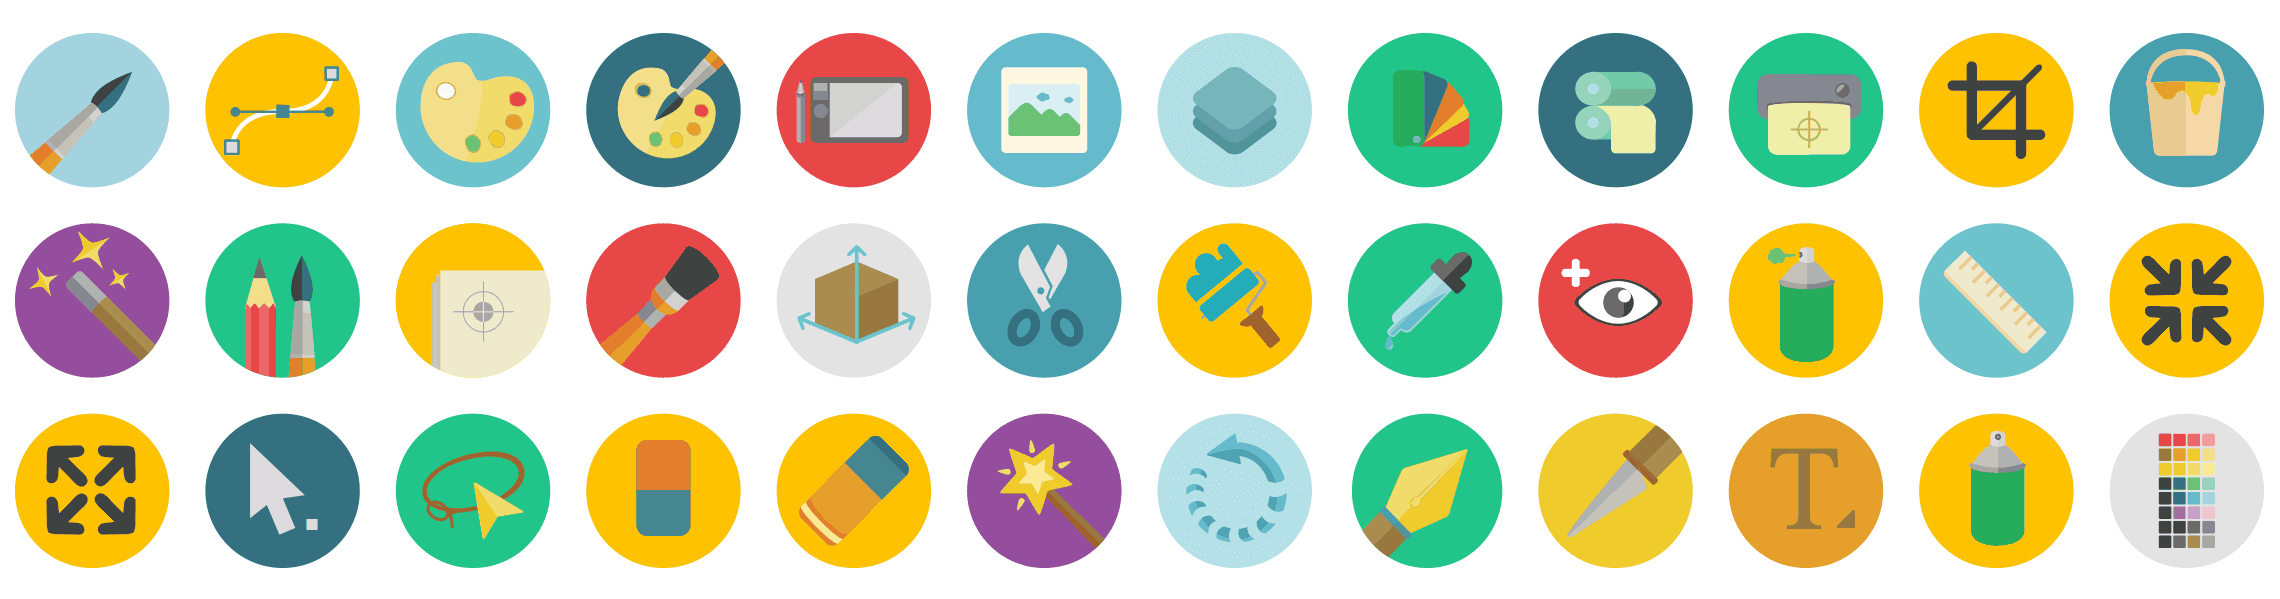 graphic-design-tools-flat-icons-vol-1-preview